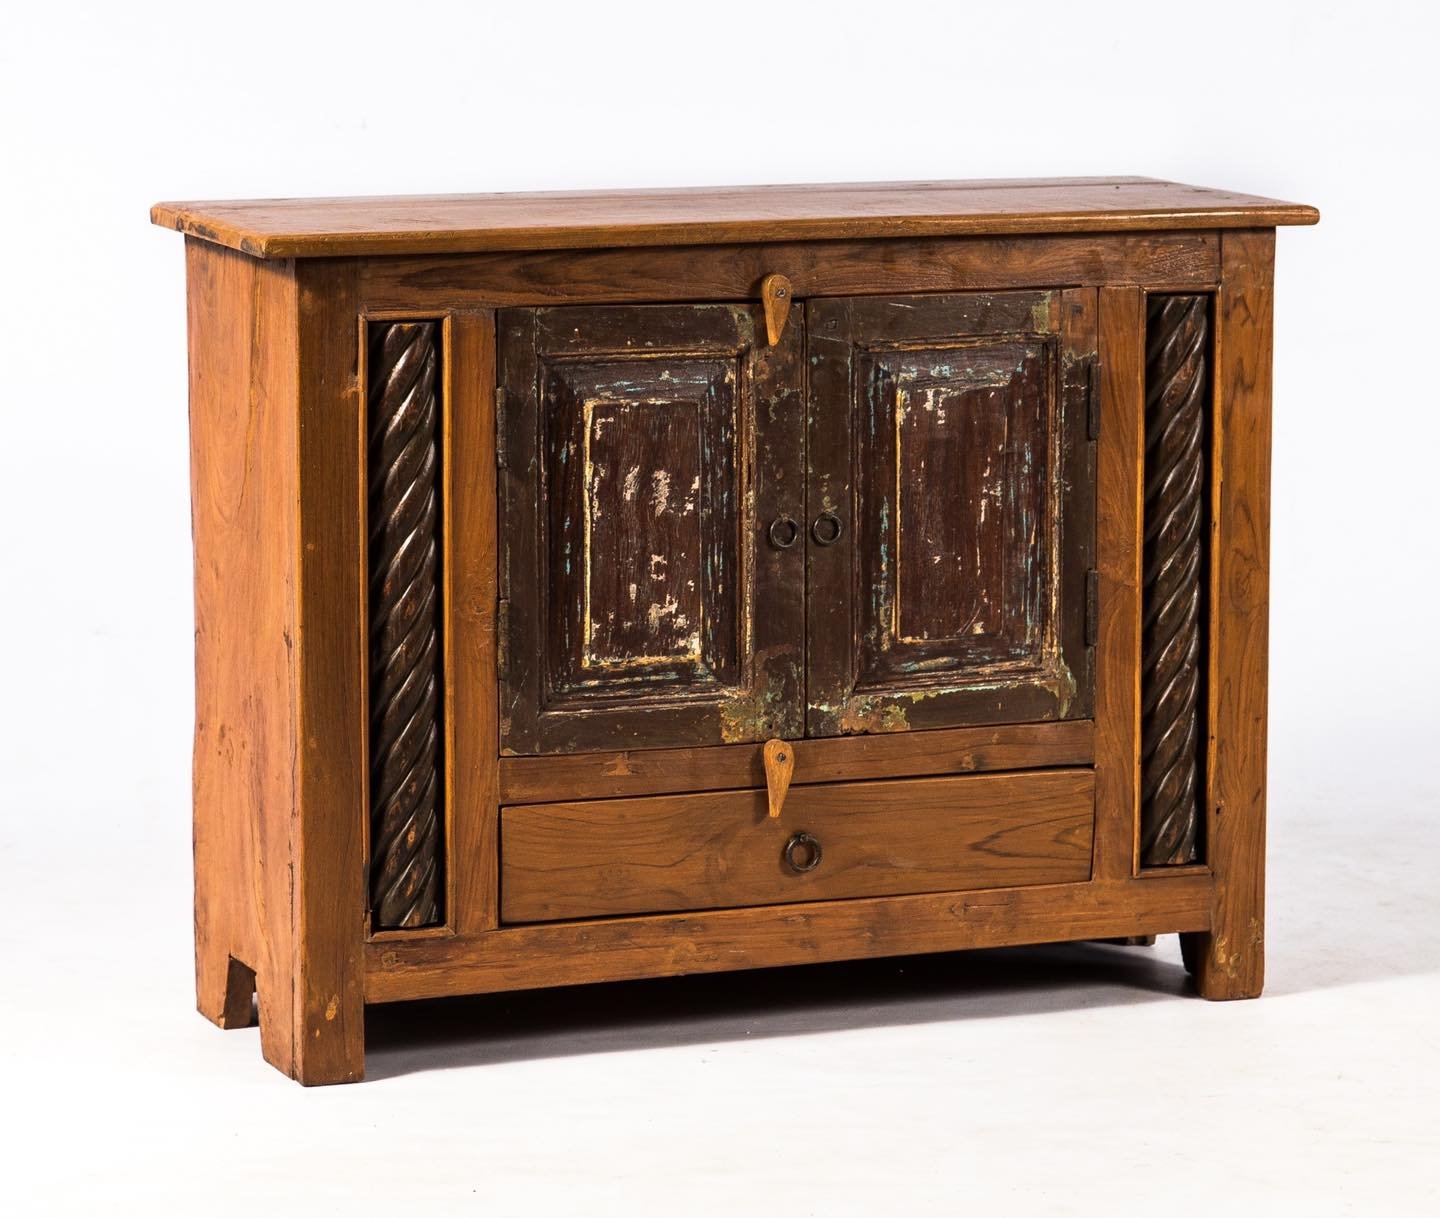 CTS3 TeakWood Cabinet with Drawer